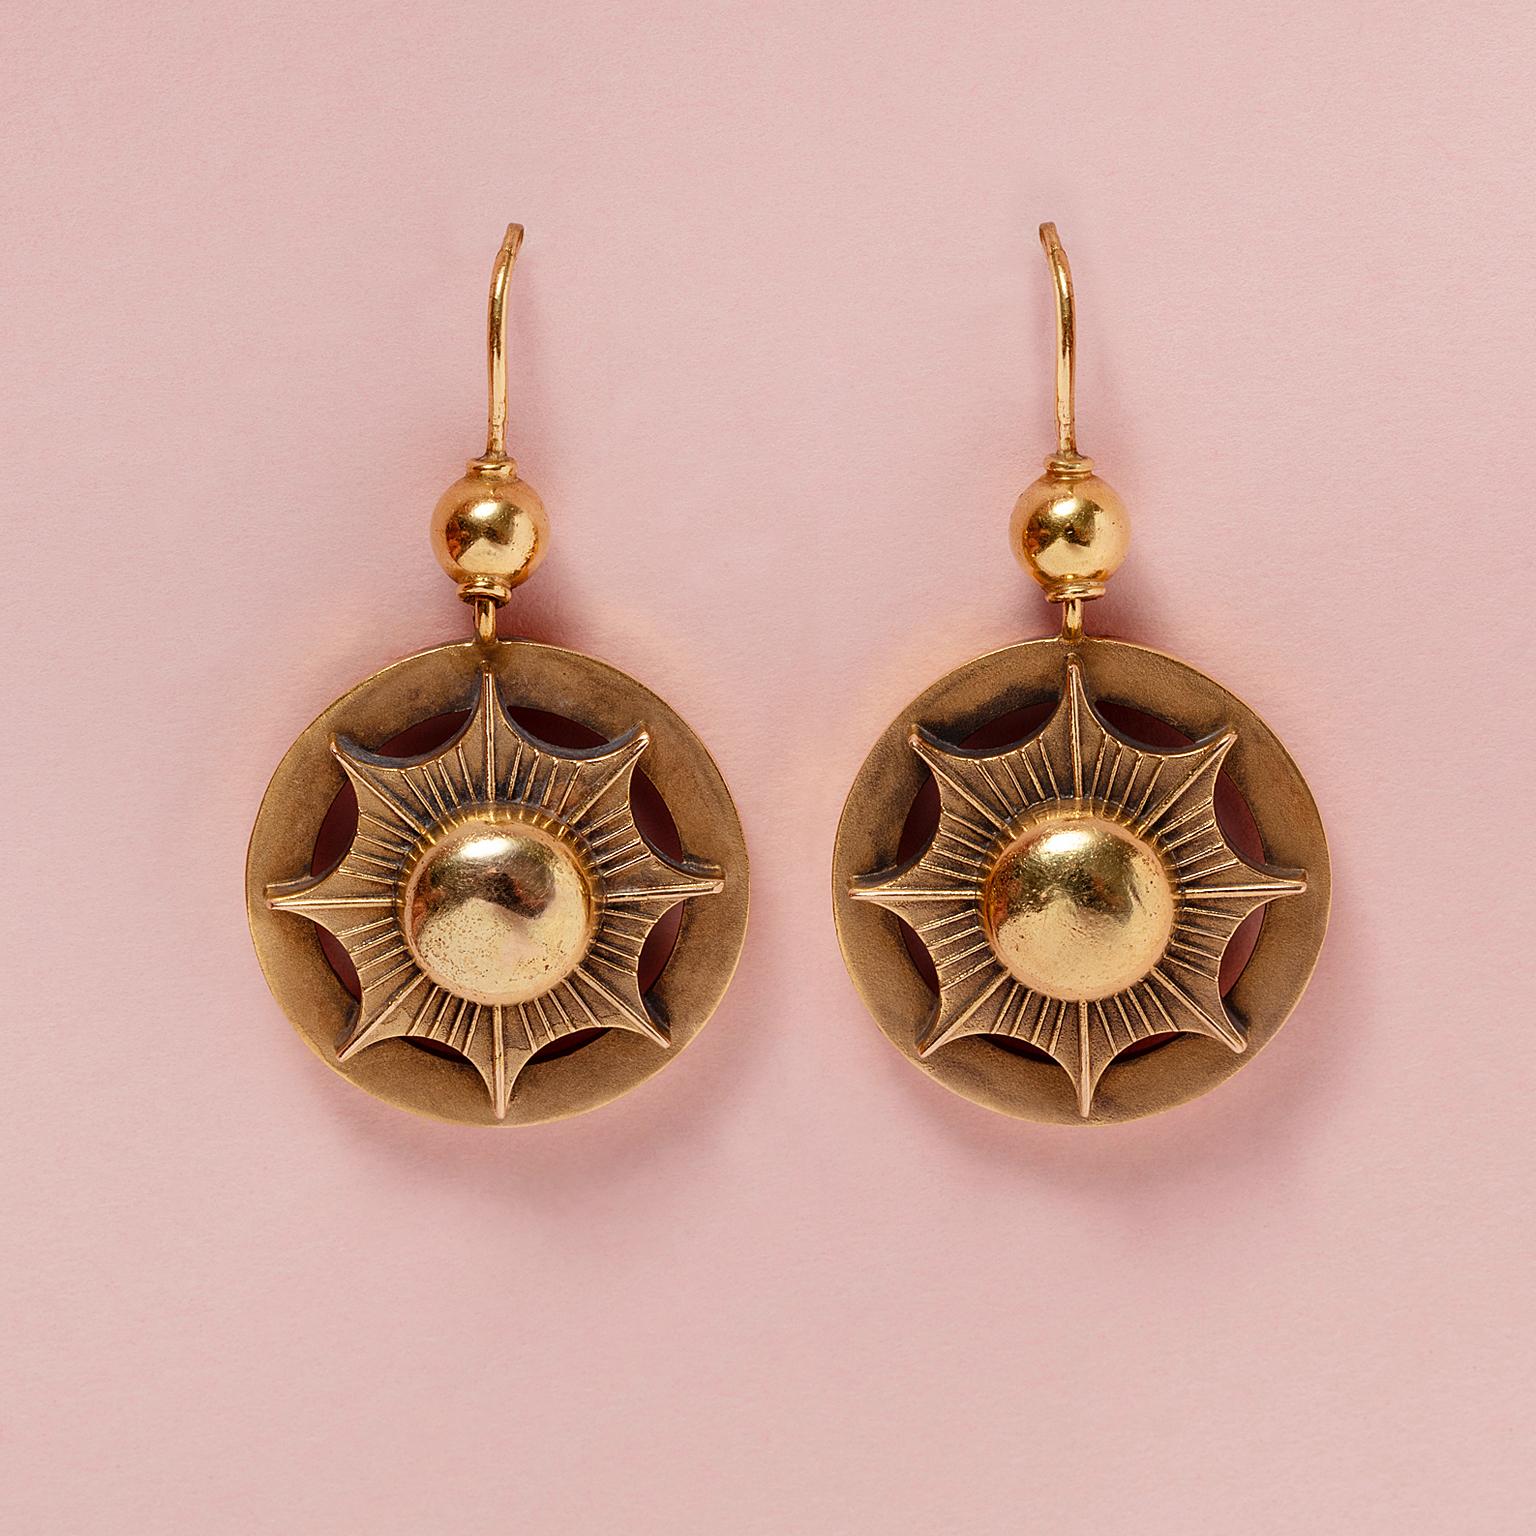 A pair of 15 carat gold round Victorian earrings with a ball on stars, England, circa 1880, hallmarked with English registration marks and Dutch re-inspection for 14 carat gold
weight: 4.08 grams
dimensions: 3.2 x 1.8 cm